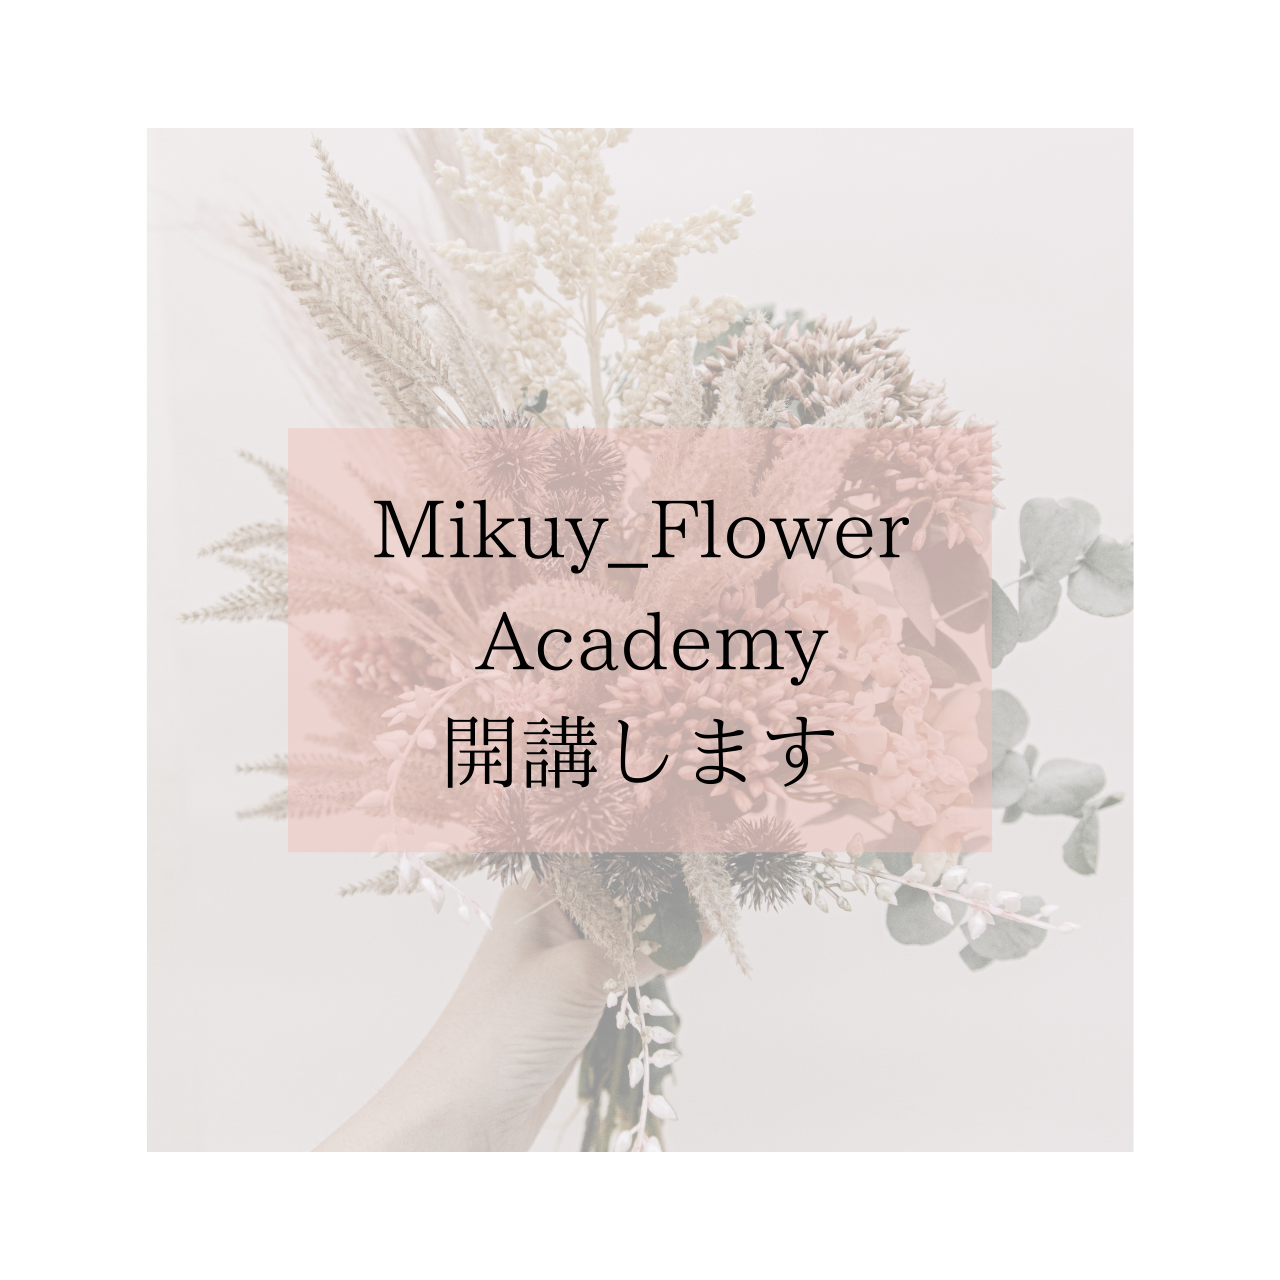 Mikuy_Flower Academy開講します